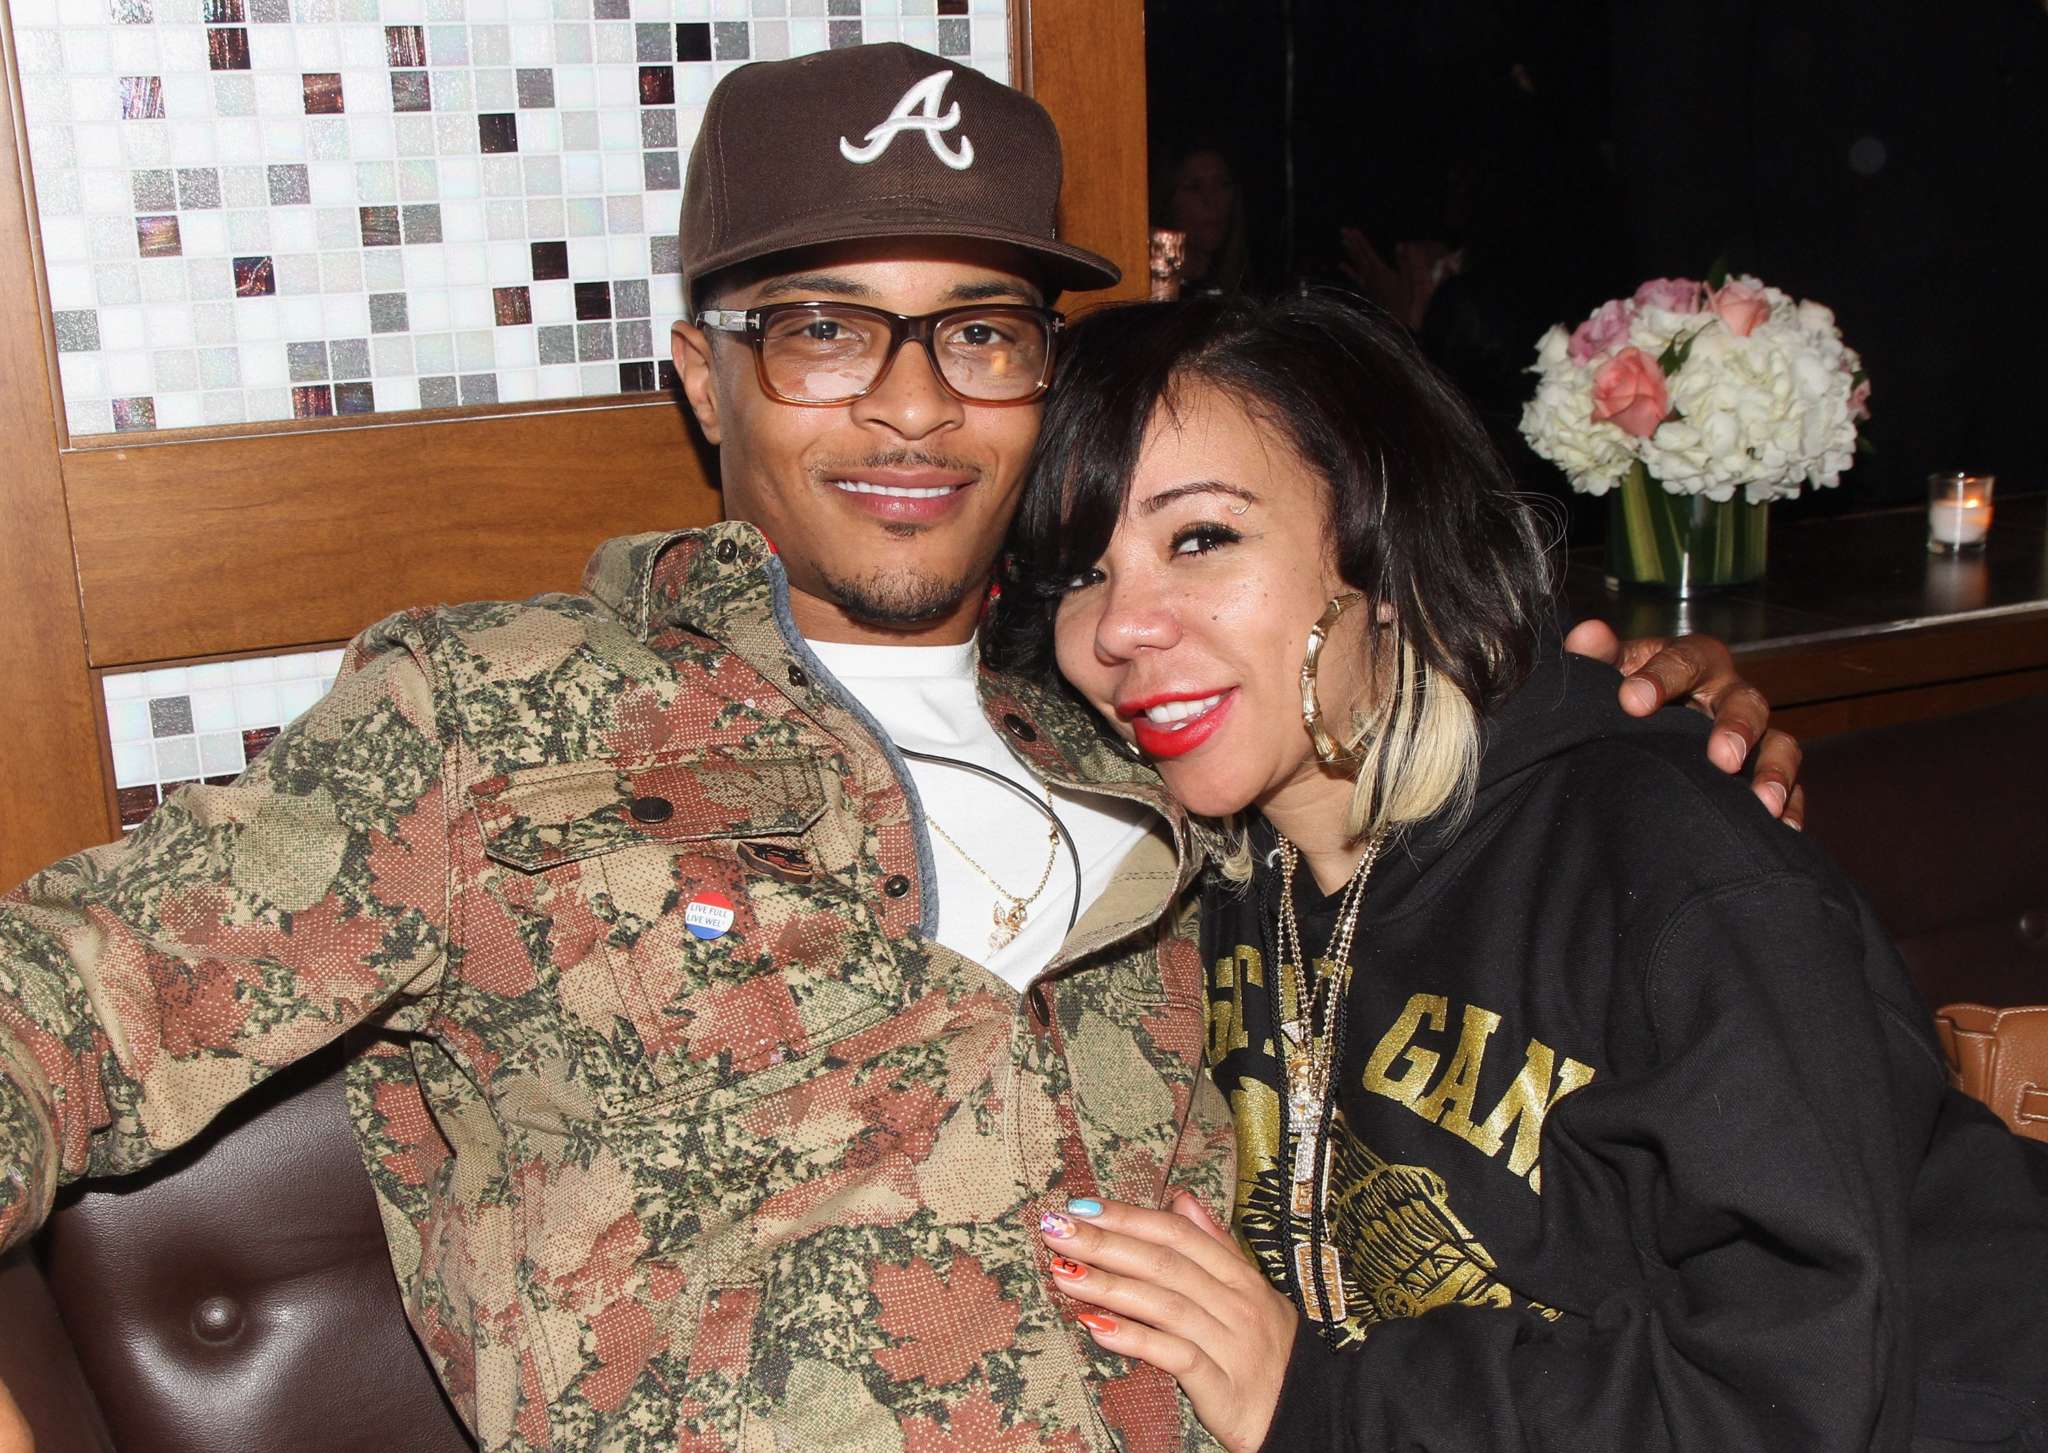 Tiny Harris Raises Awareness About An Important Case - Learn About Tianna Arata